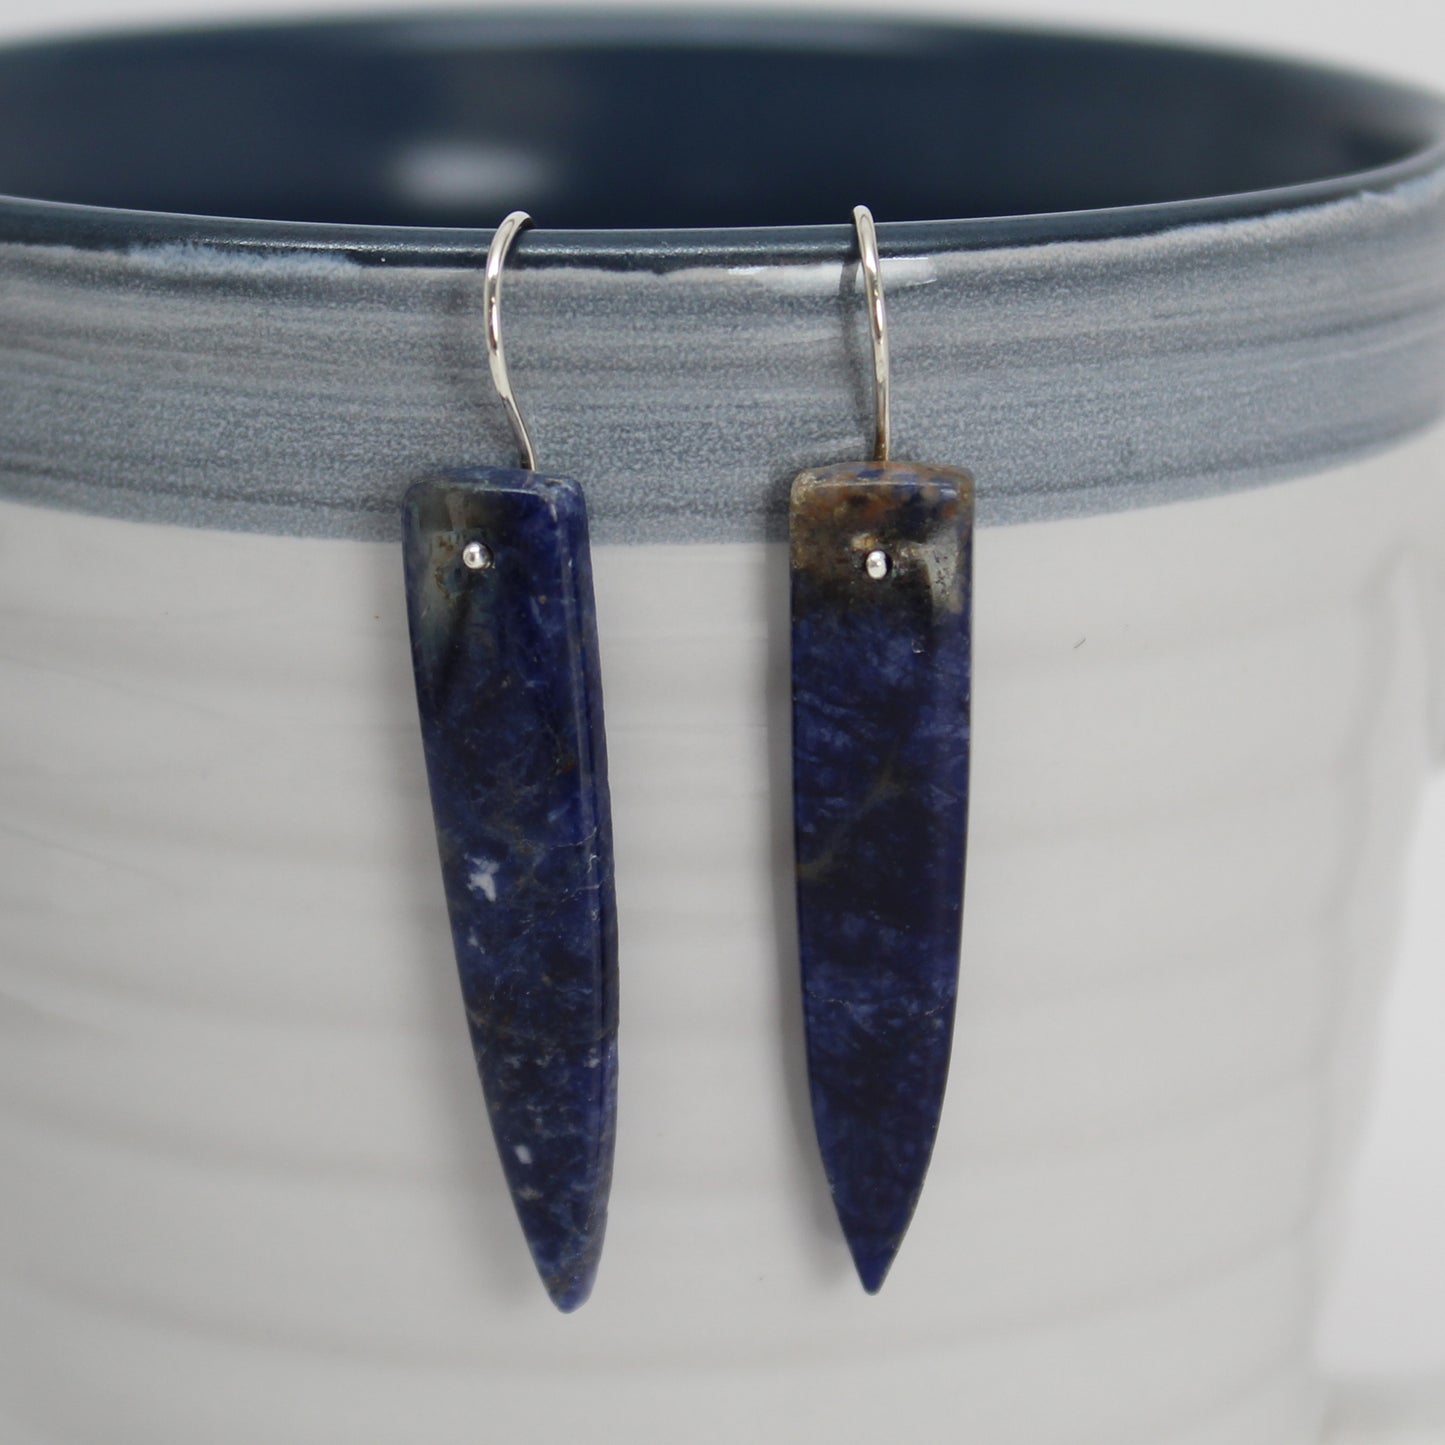 Sodalite Earrings with Sterling Silver Ear Wires